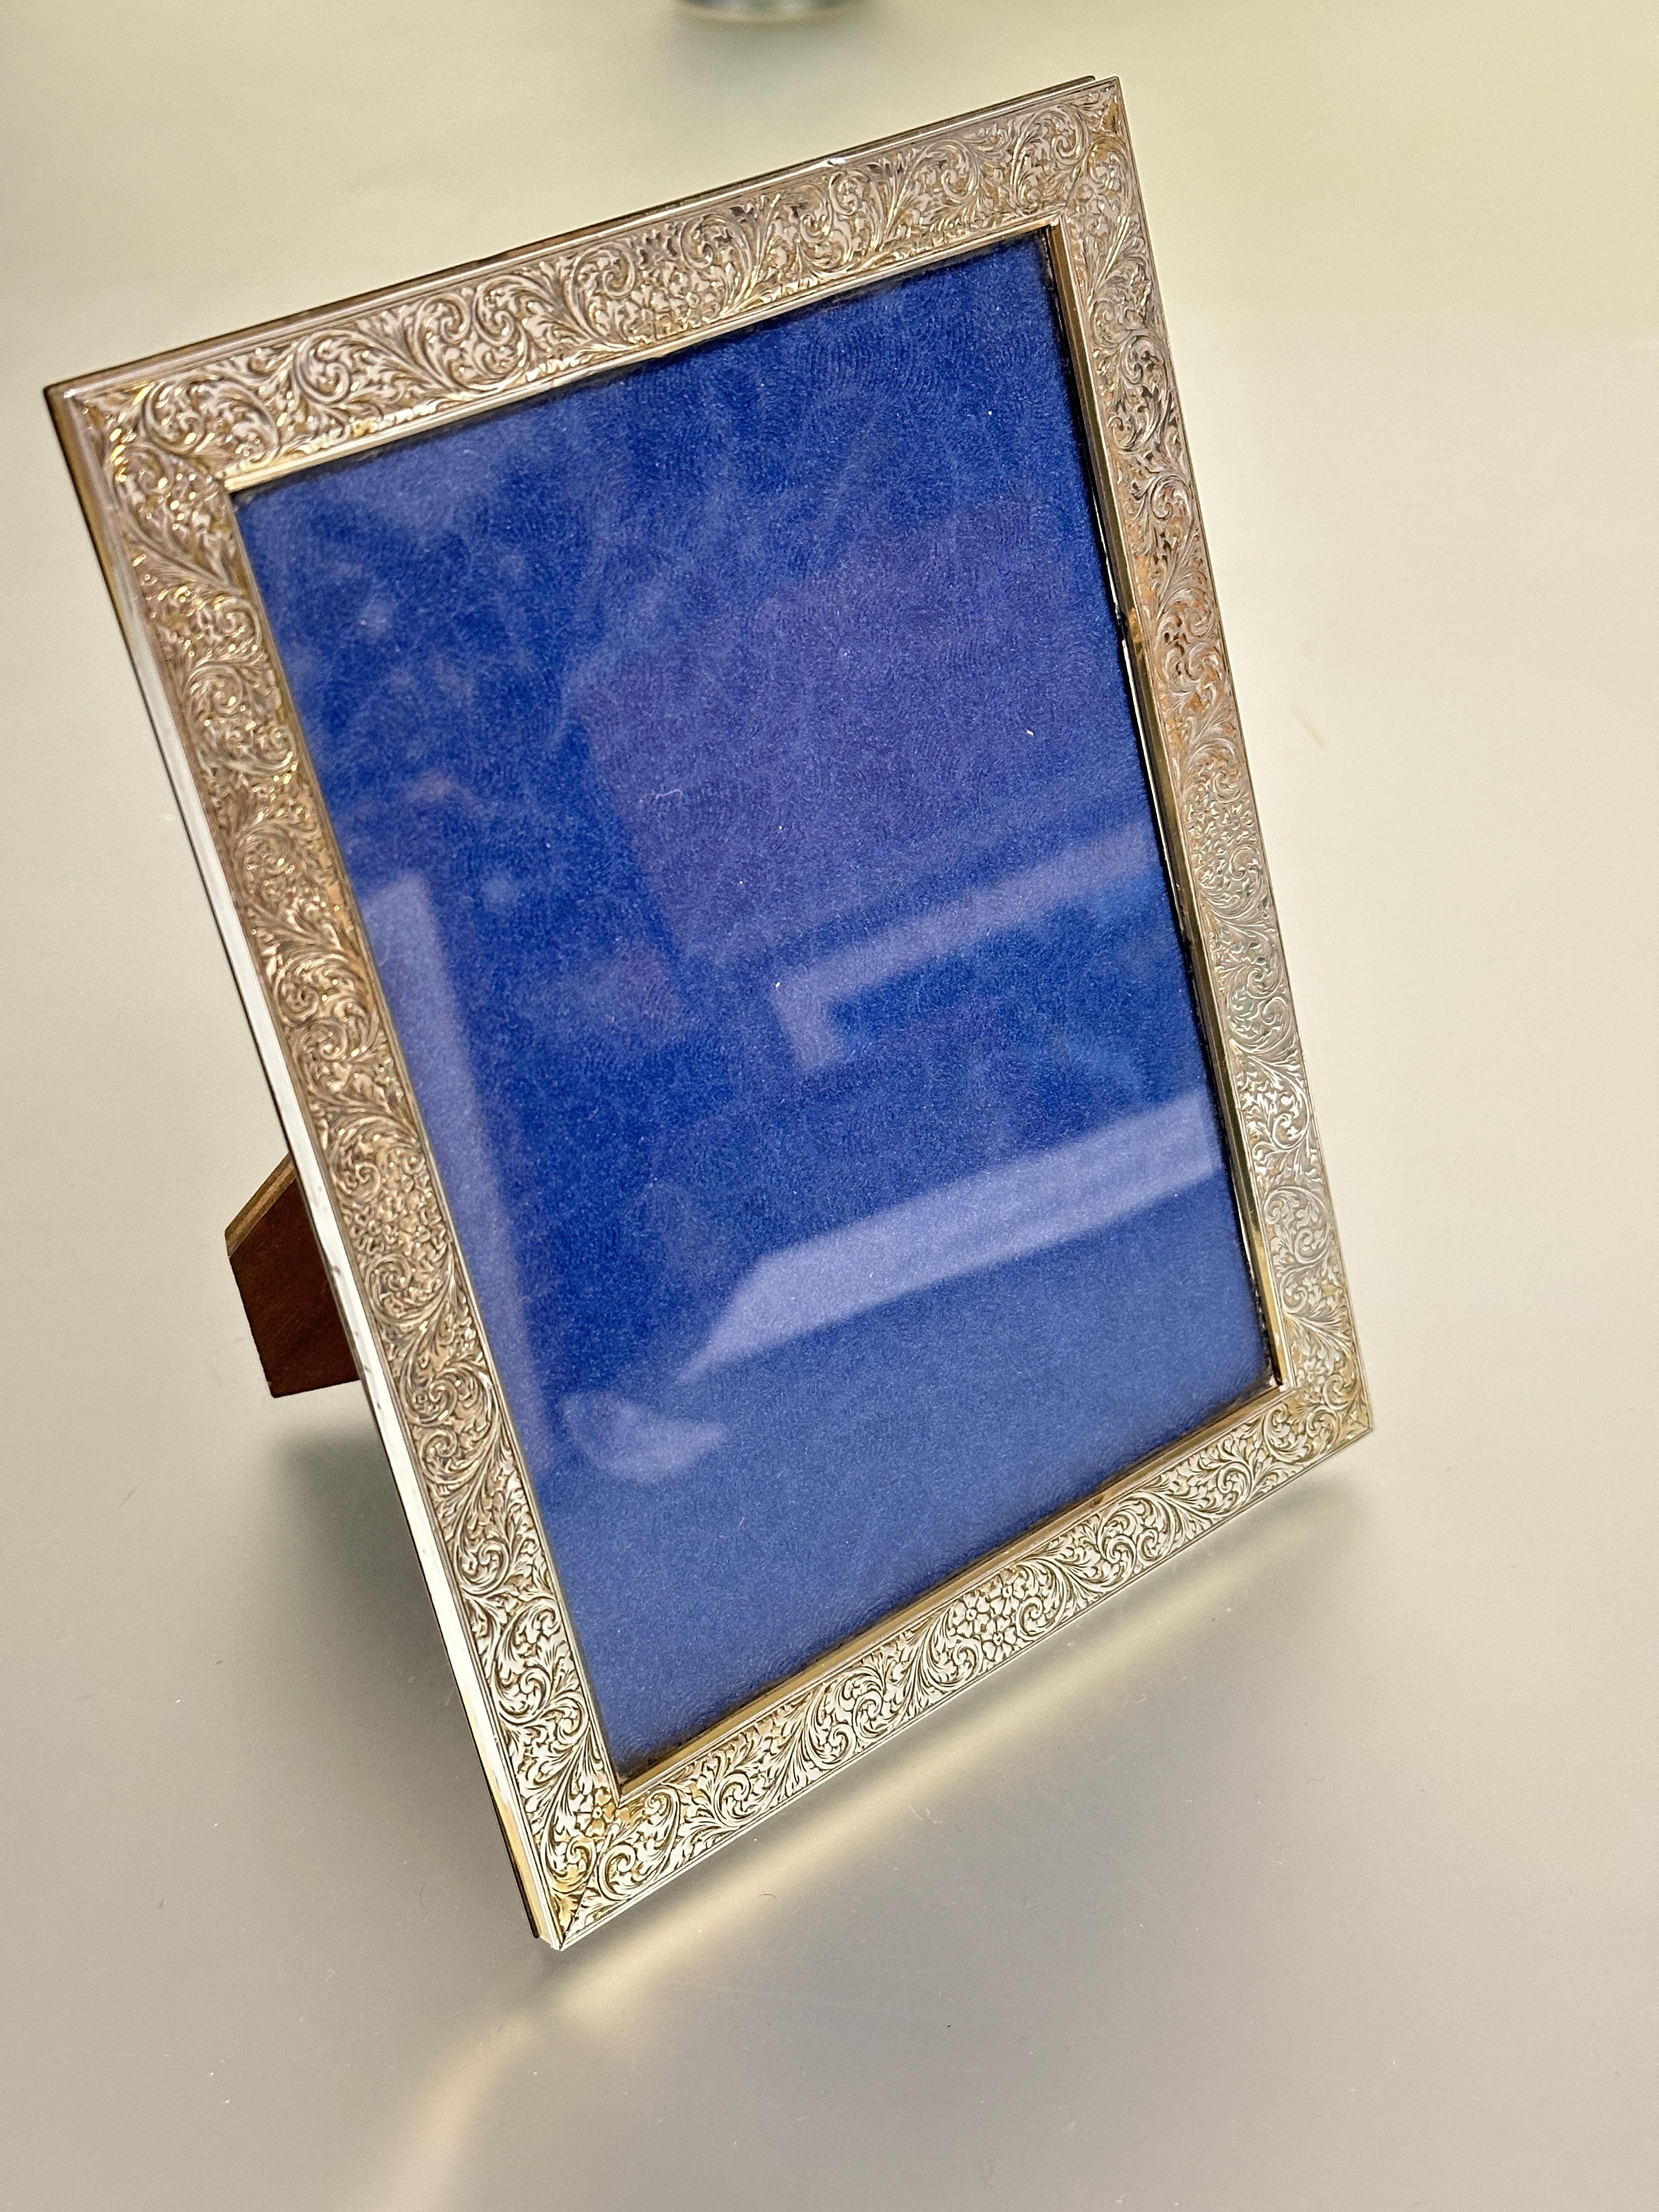 A 1920s silver rectangular photograph frame with chased scrolling acanthus leaf design and early